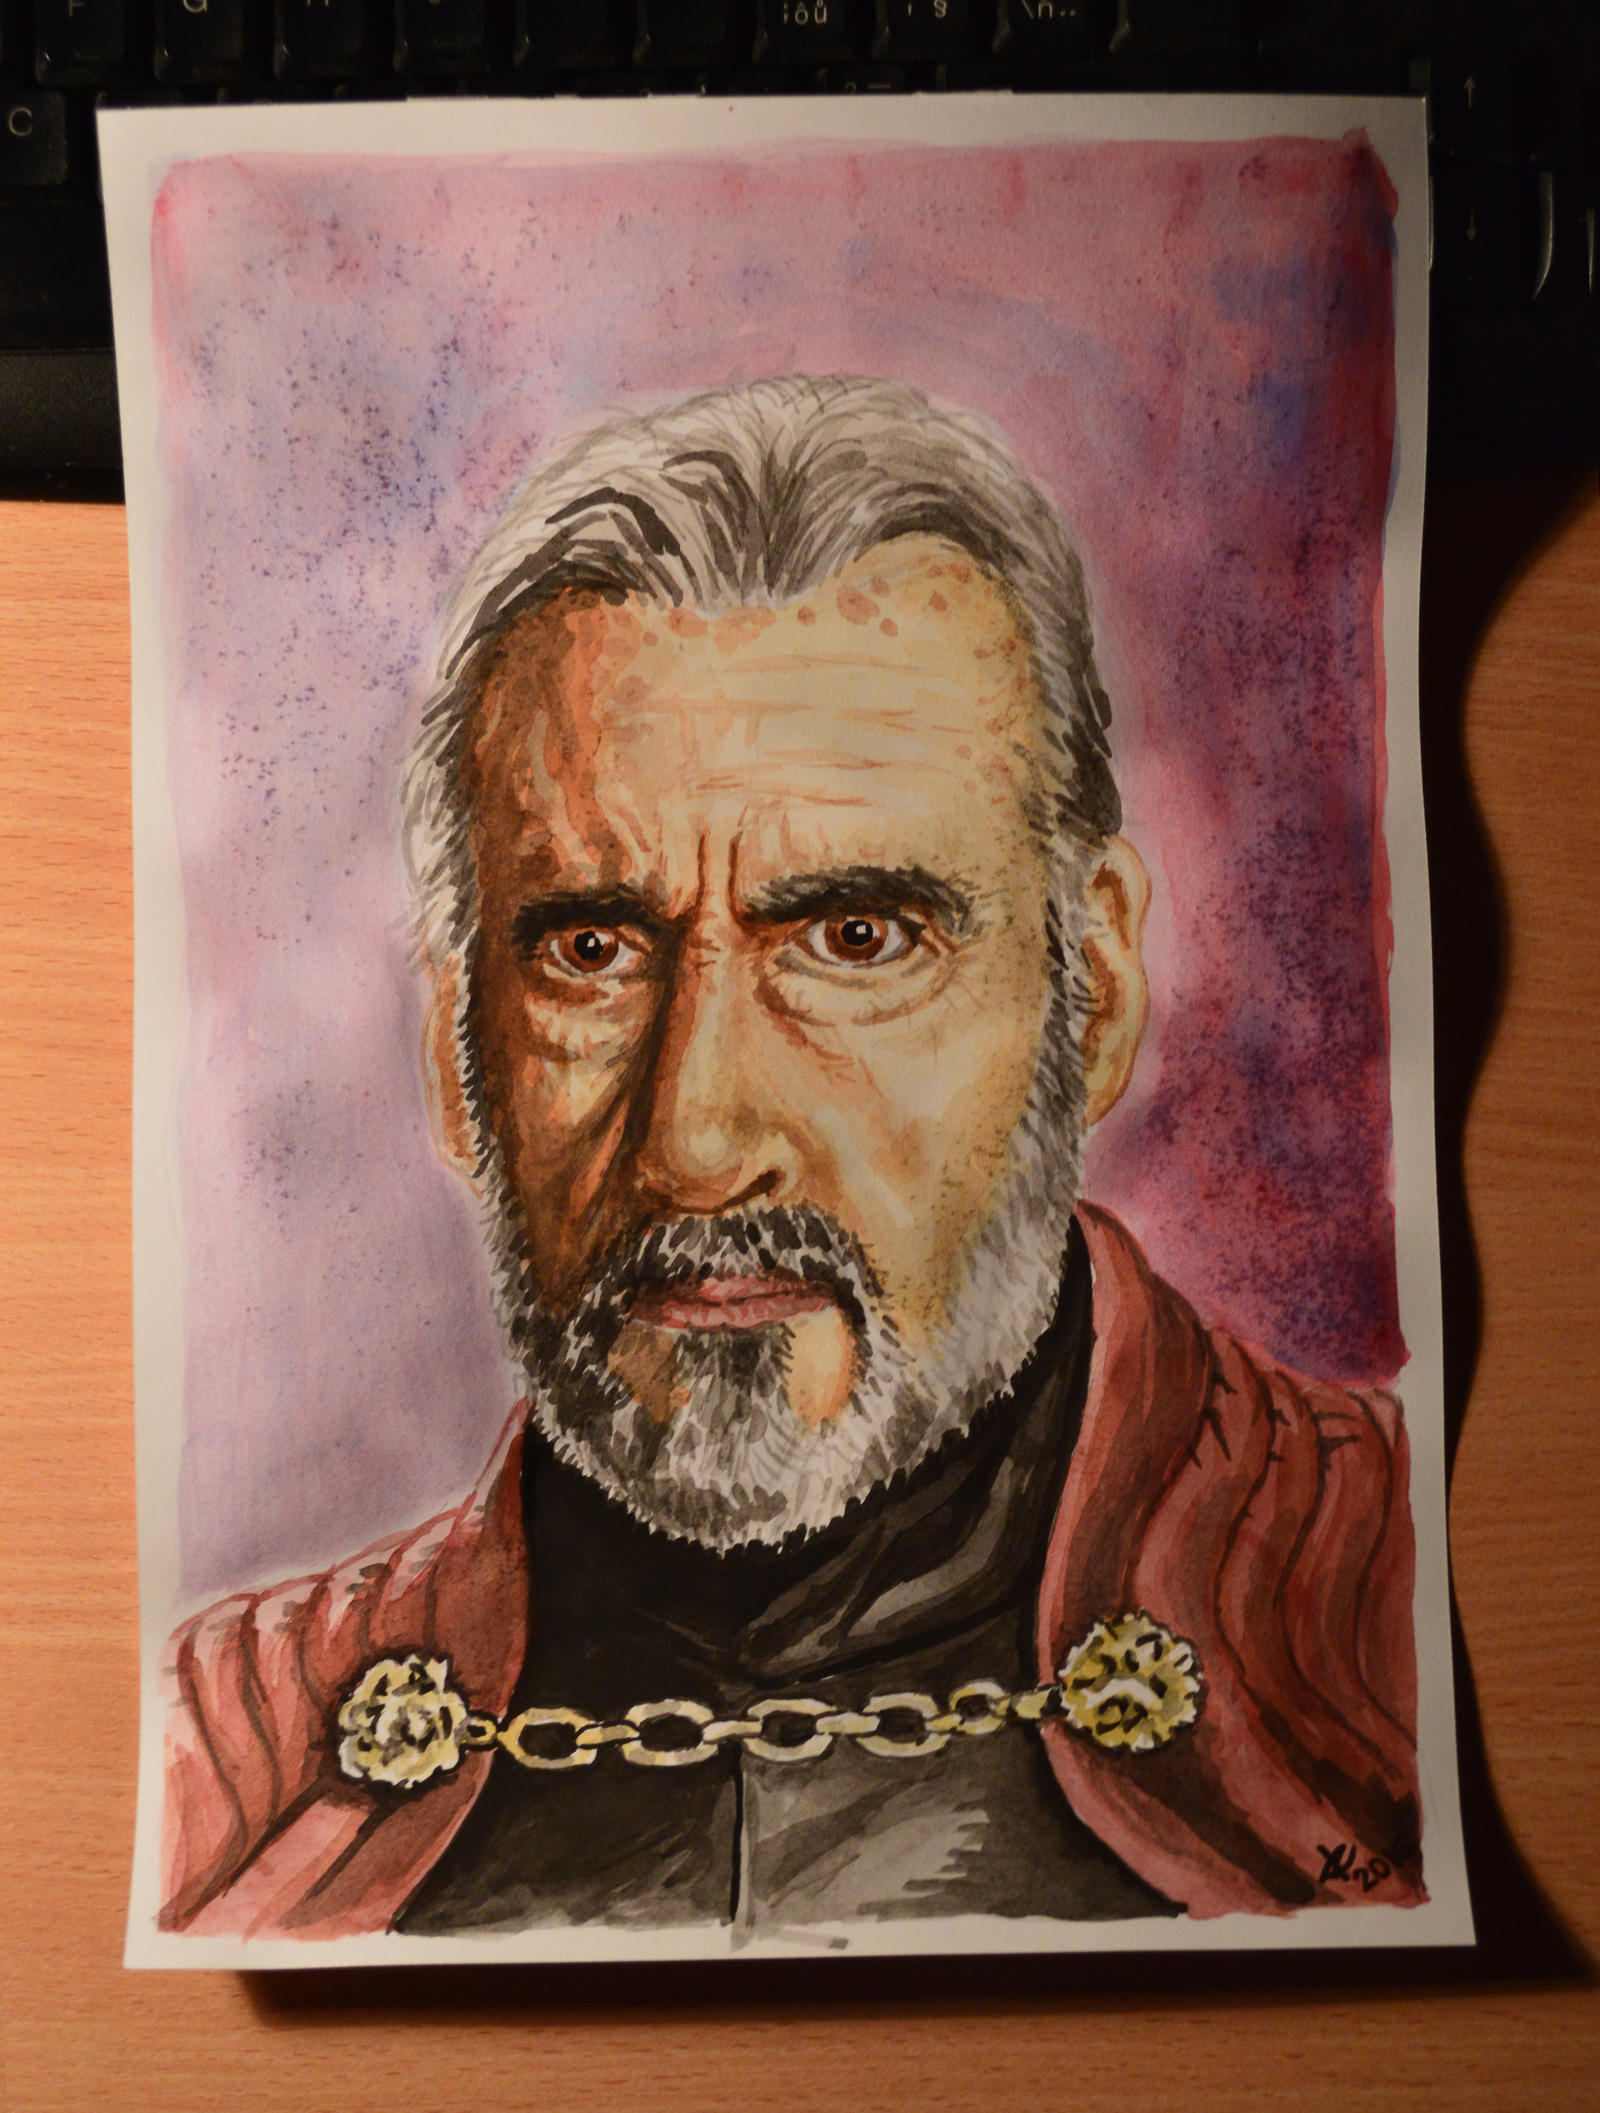 COUNT DOOKU by mammon3 on DeviantArt